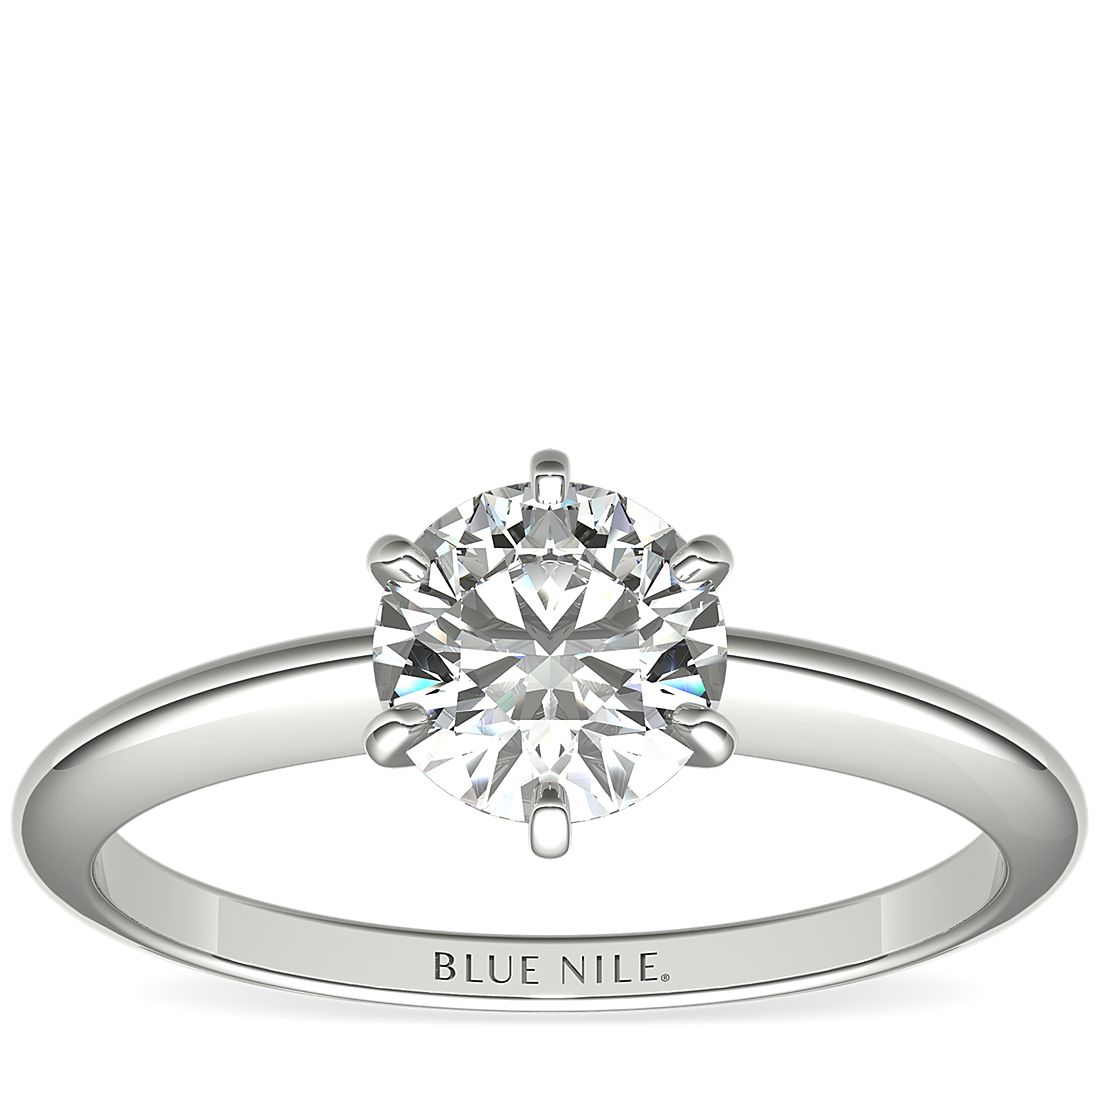 Sophie pakke Logisk Classic Six-Prong Solitaire Engagement Ring in Platinum | Blue Nile